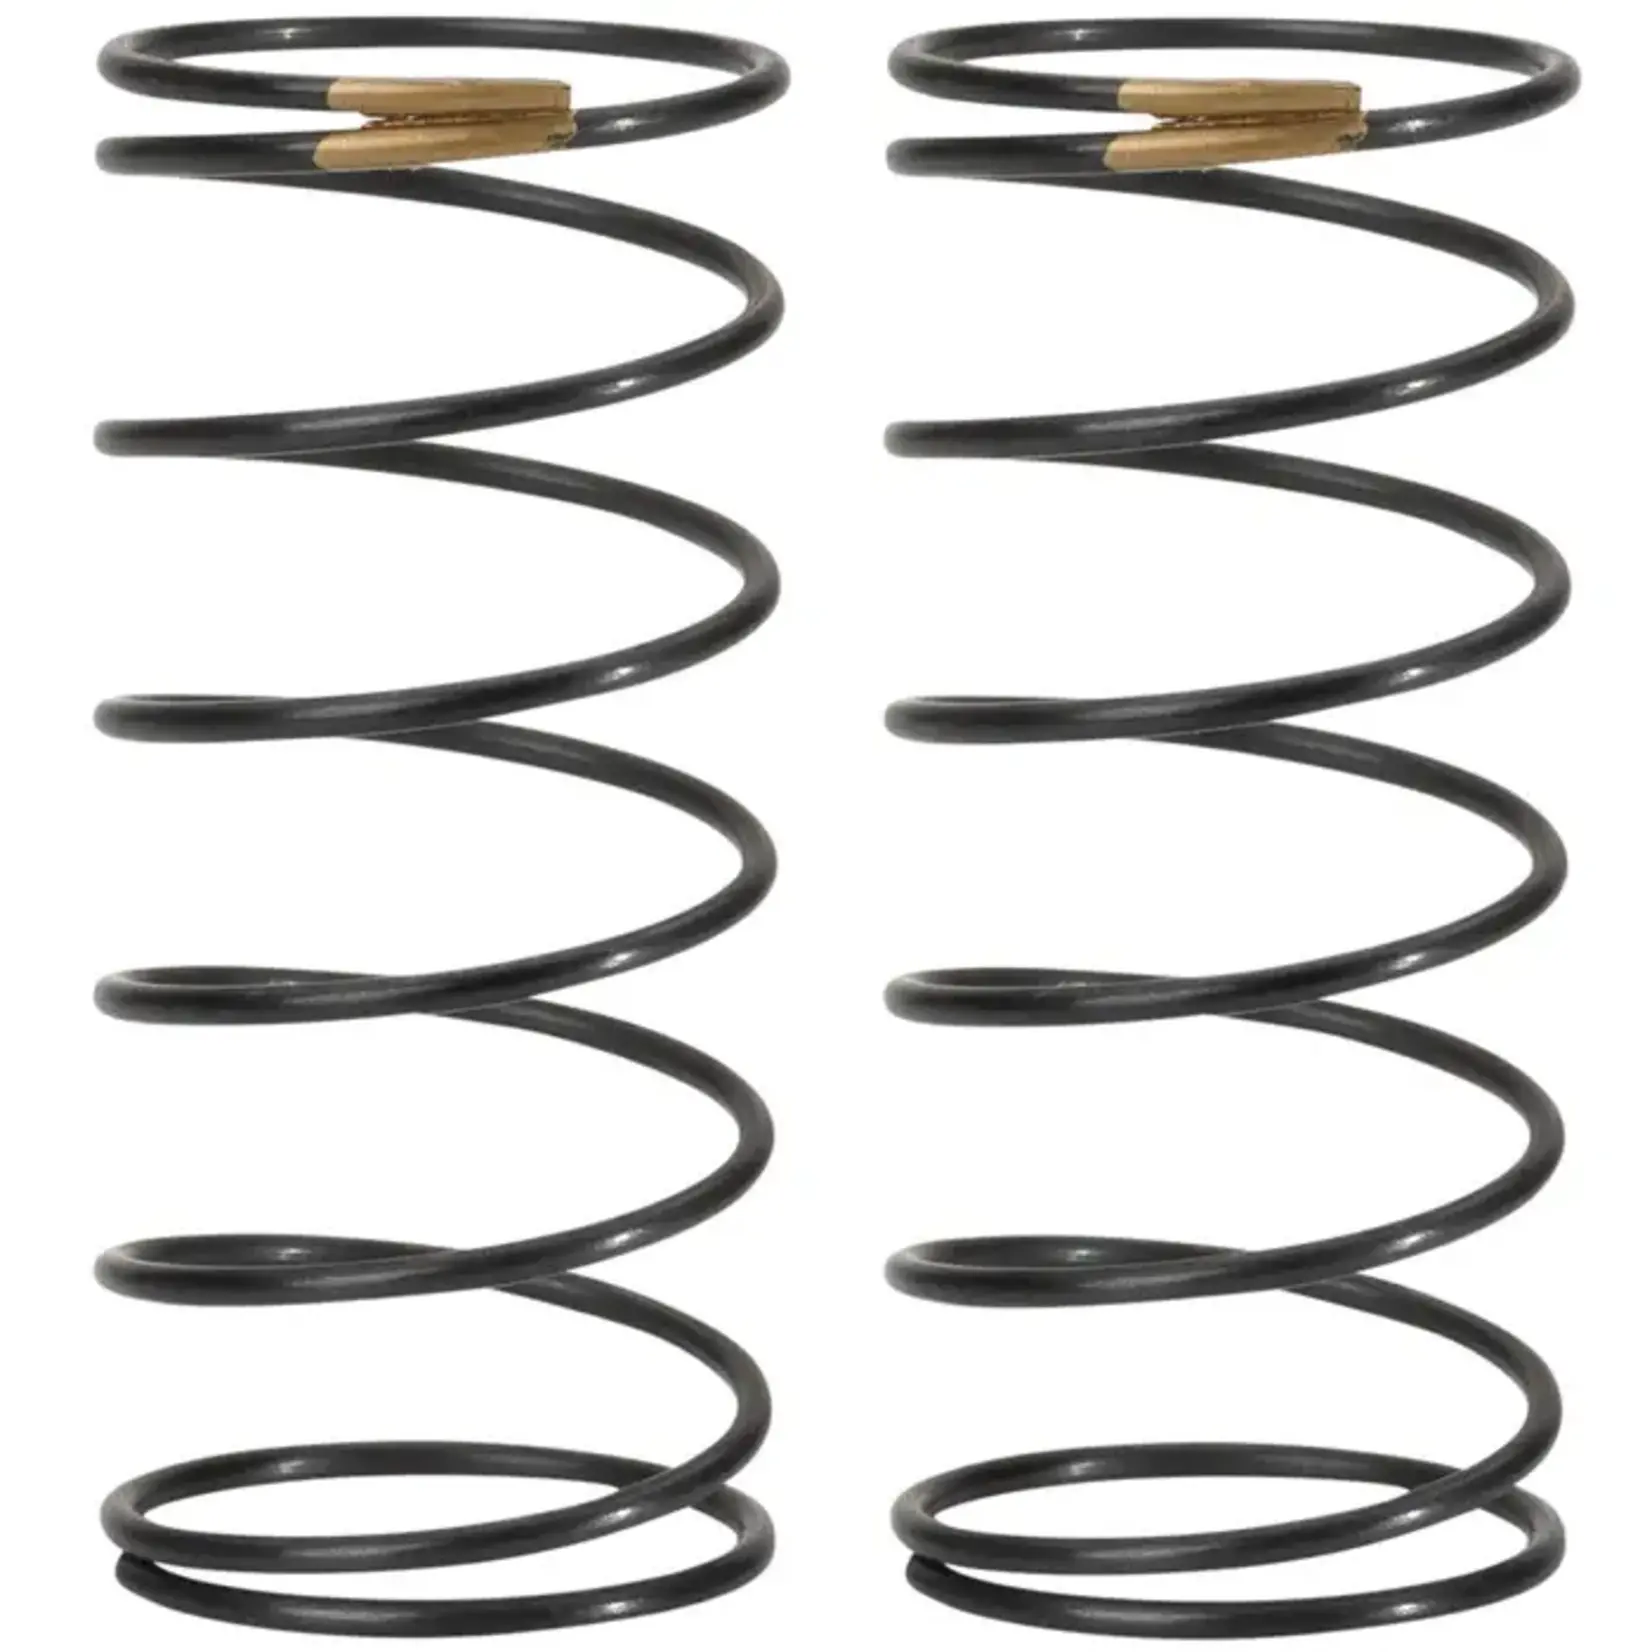 1UP 1UP10512 1Up Racing X-Gear 13mm Buggy Front Springs - Soft 7.25T Gold